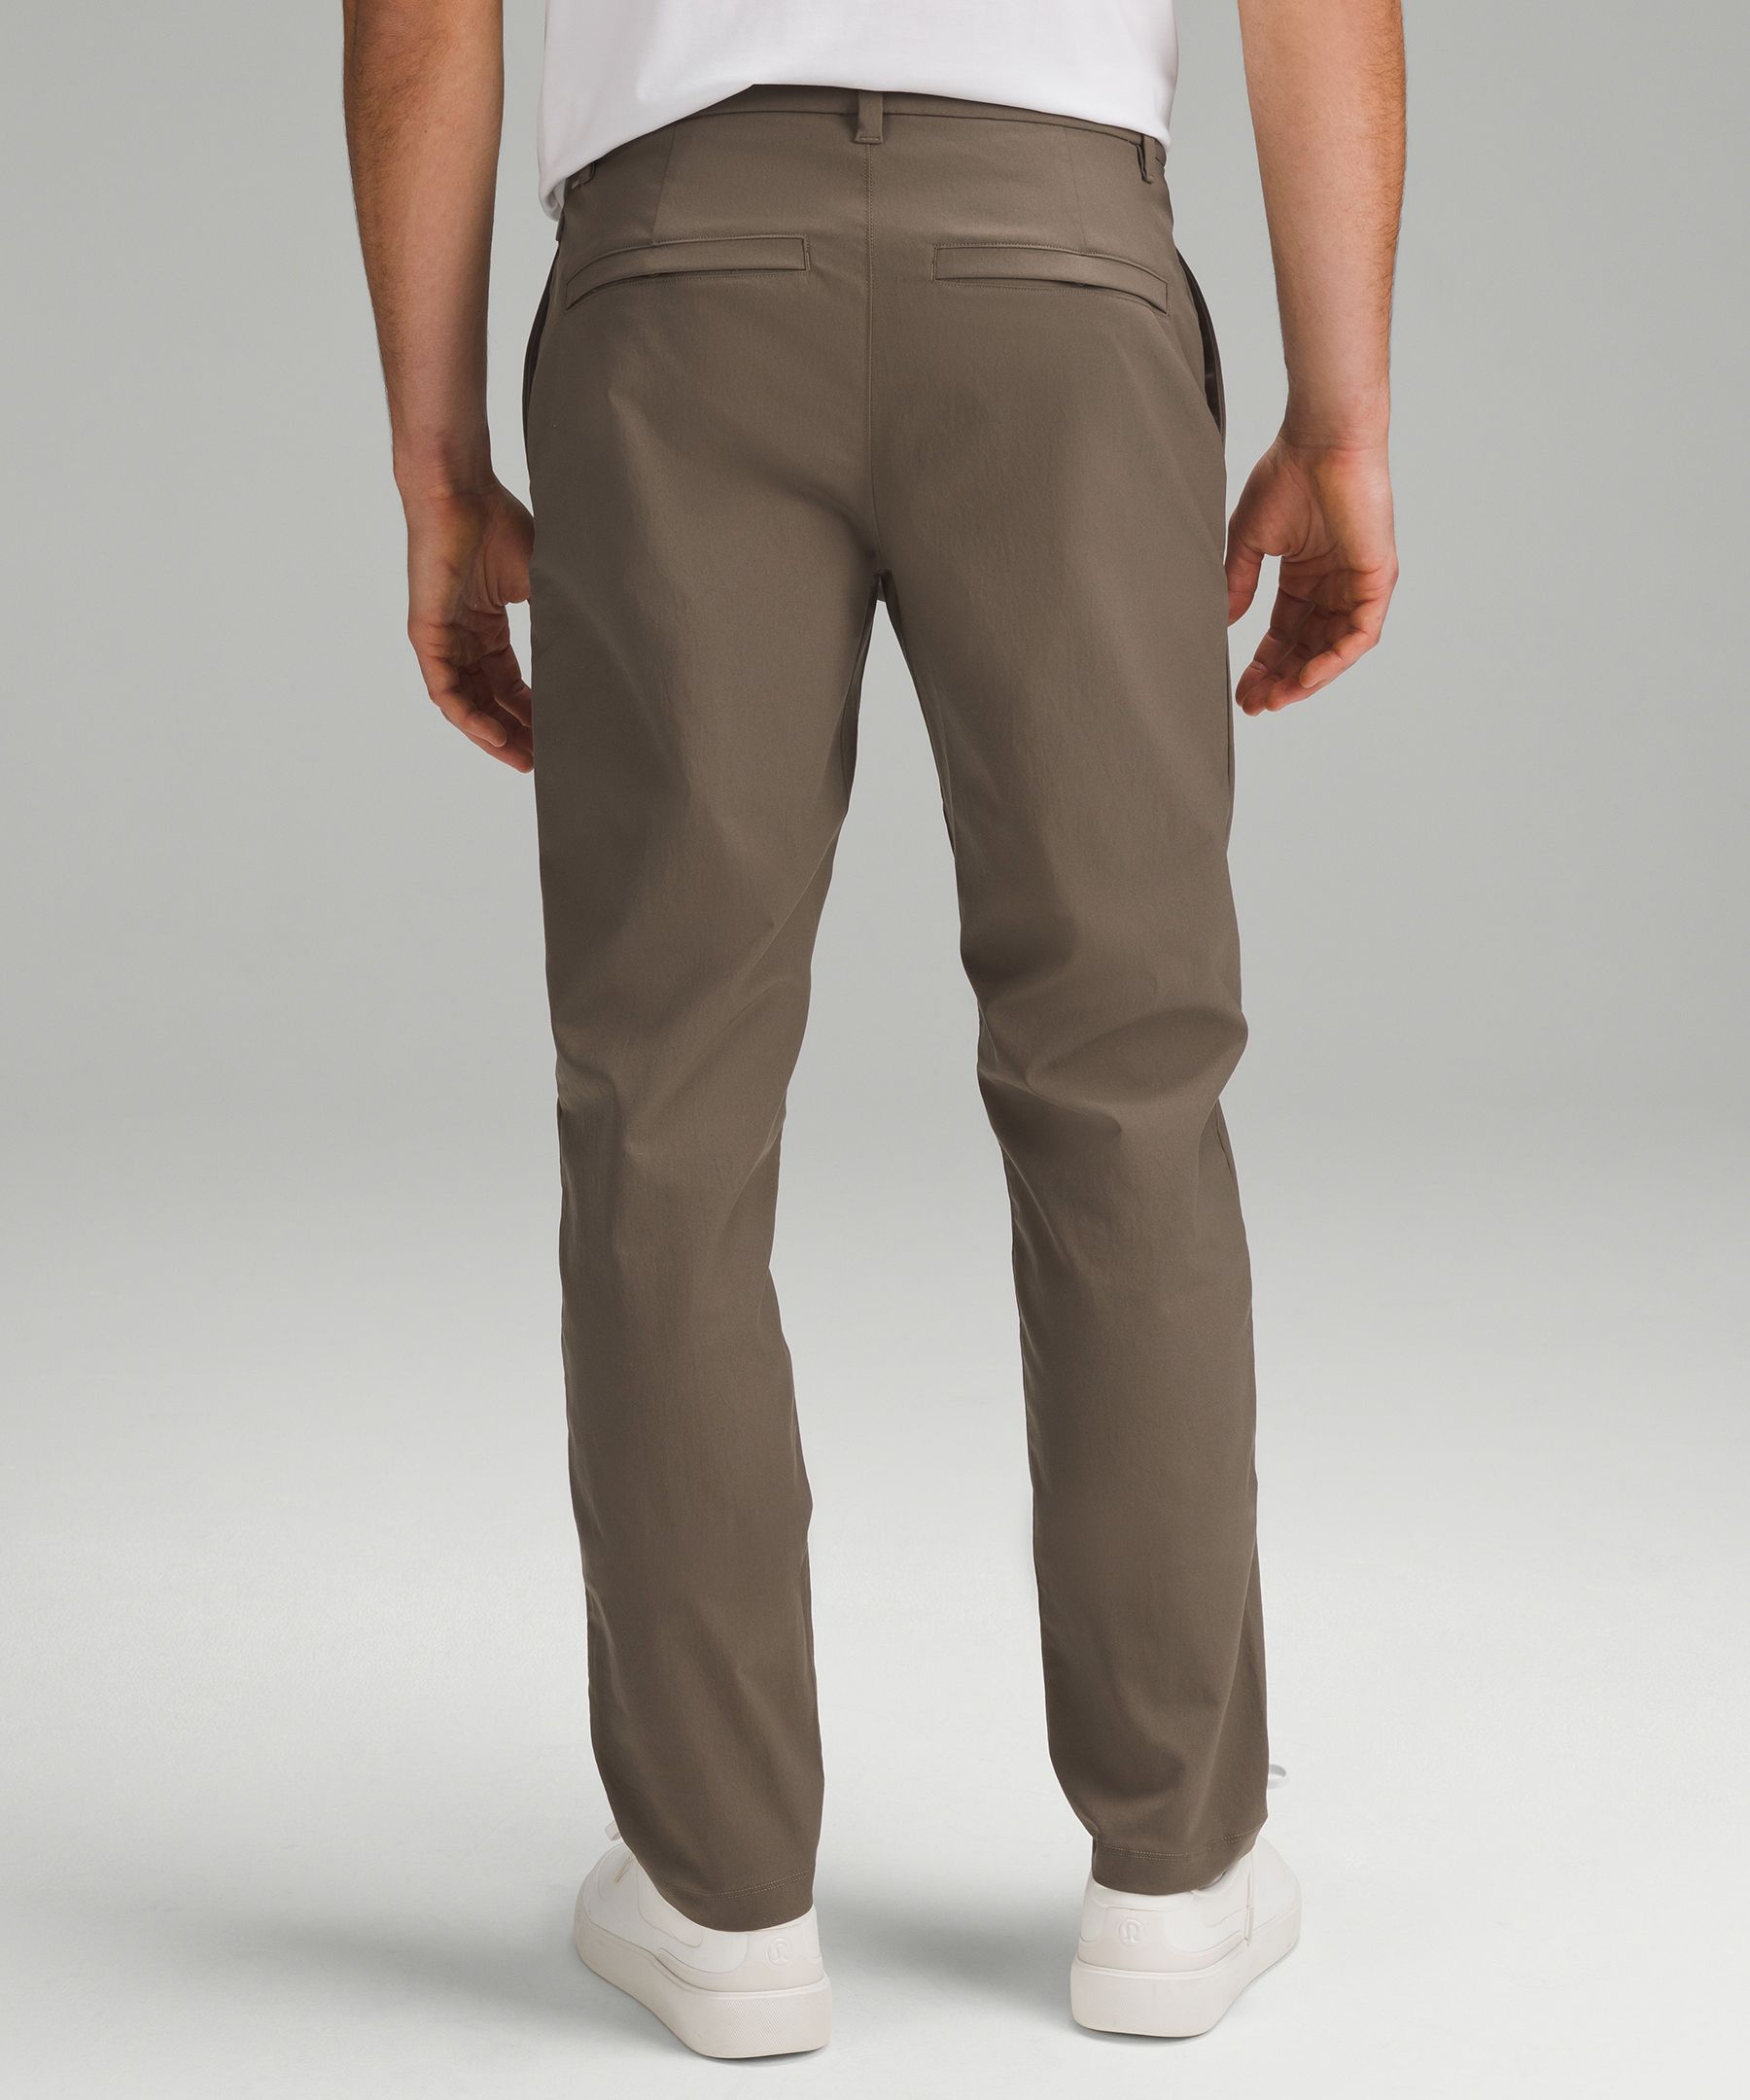 ABC Classic-Fit Trouser 30"L *Smooth Twill | Men's Trousers